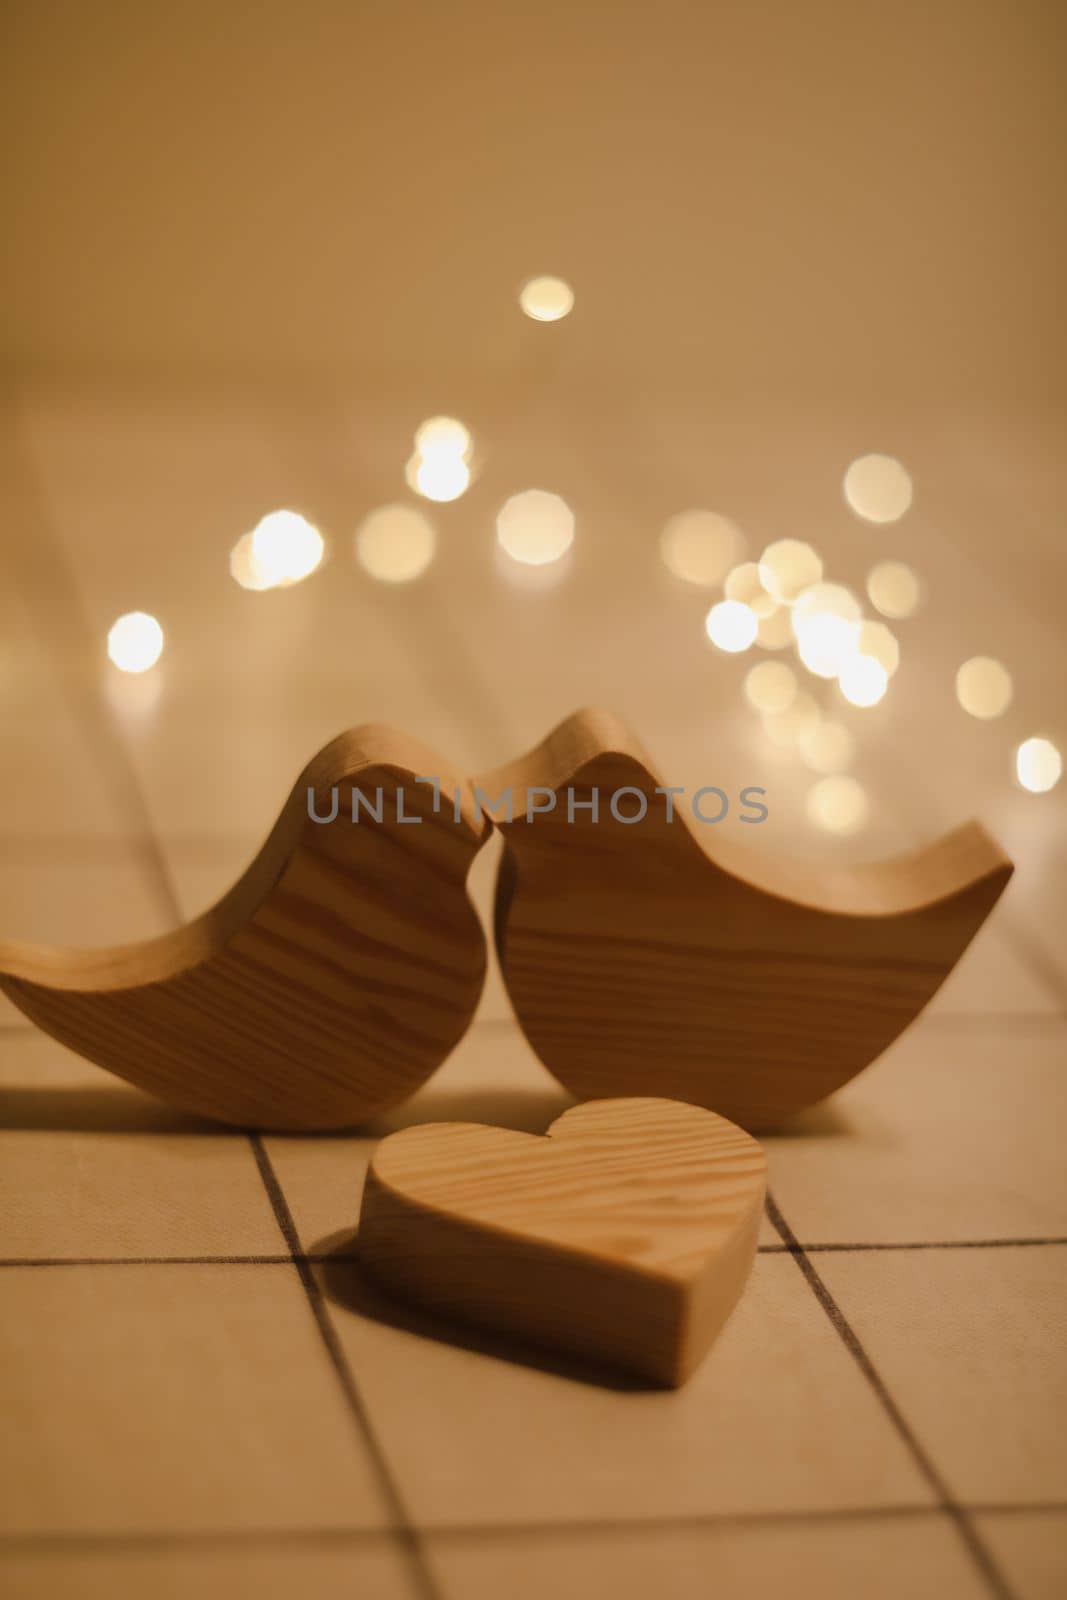 two wooden birds and heart made by bokeh lights background. Valentines day, Easter, Wedding card with wooden figures of birds, home decor.